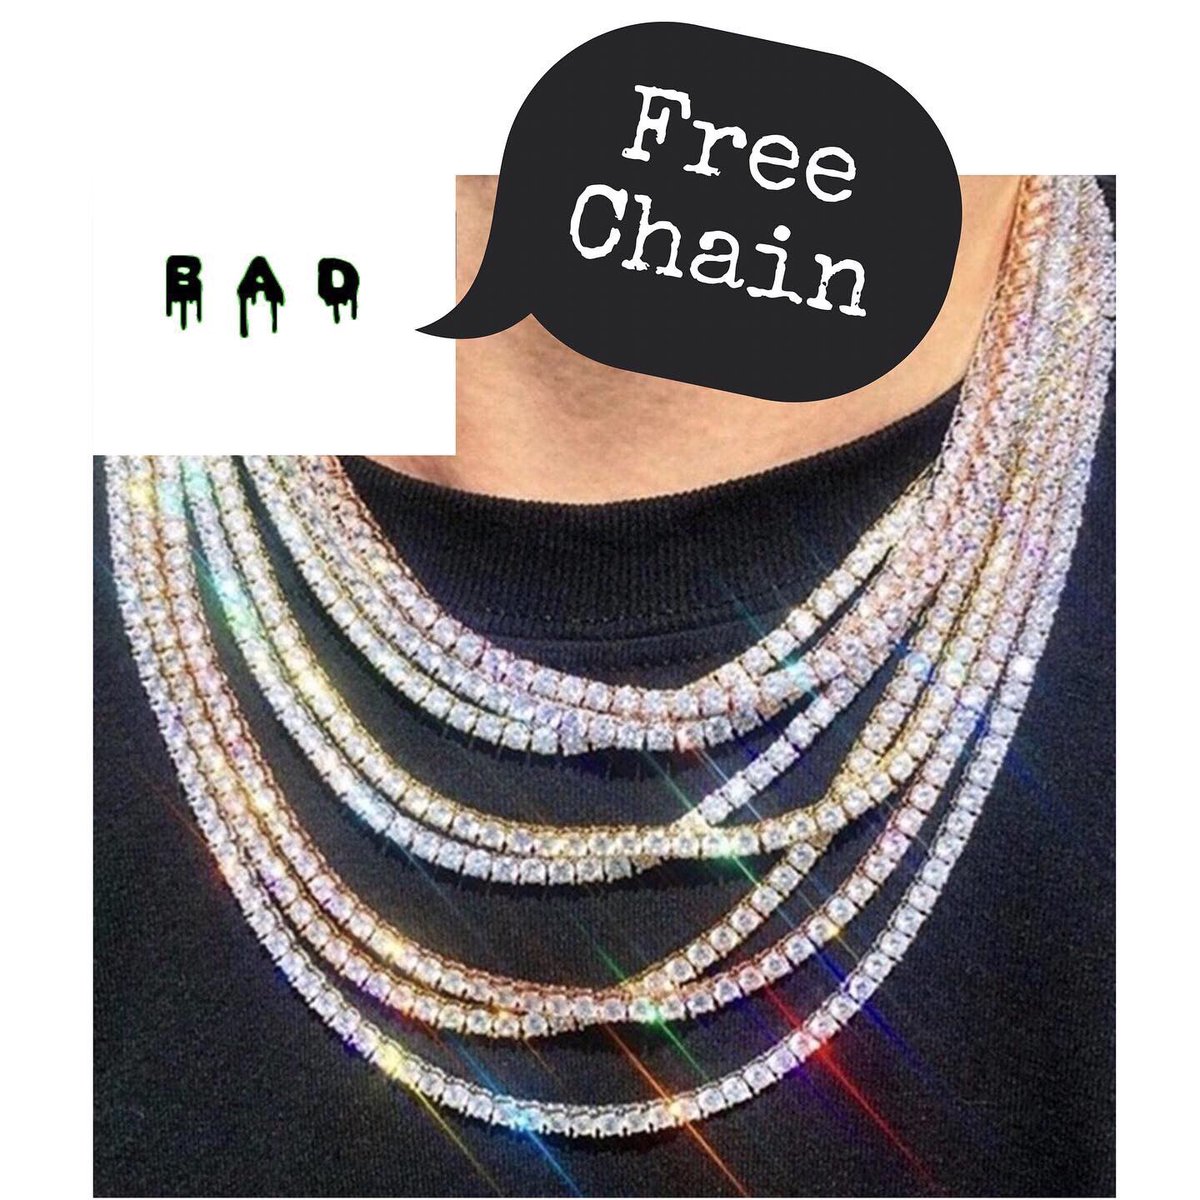 FREE CHAIN FRIDAY ⠀
⠀
Tap 👇🏽 to claim yours! ❄️⛓⠀
bornagaindrip.com/products/free-…
⠀
(Discount applies in cart)
⠀
@th3_mind @upcomingbrandz⠀
#streetwear,, #ootd, #jewelry, #streetstyle, #bornagaindrip  #offwhite #customjewelry #fashionjewelry #tennischain #freejewelry